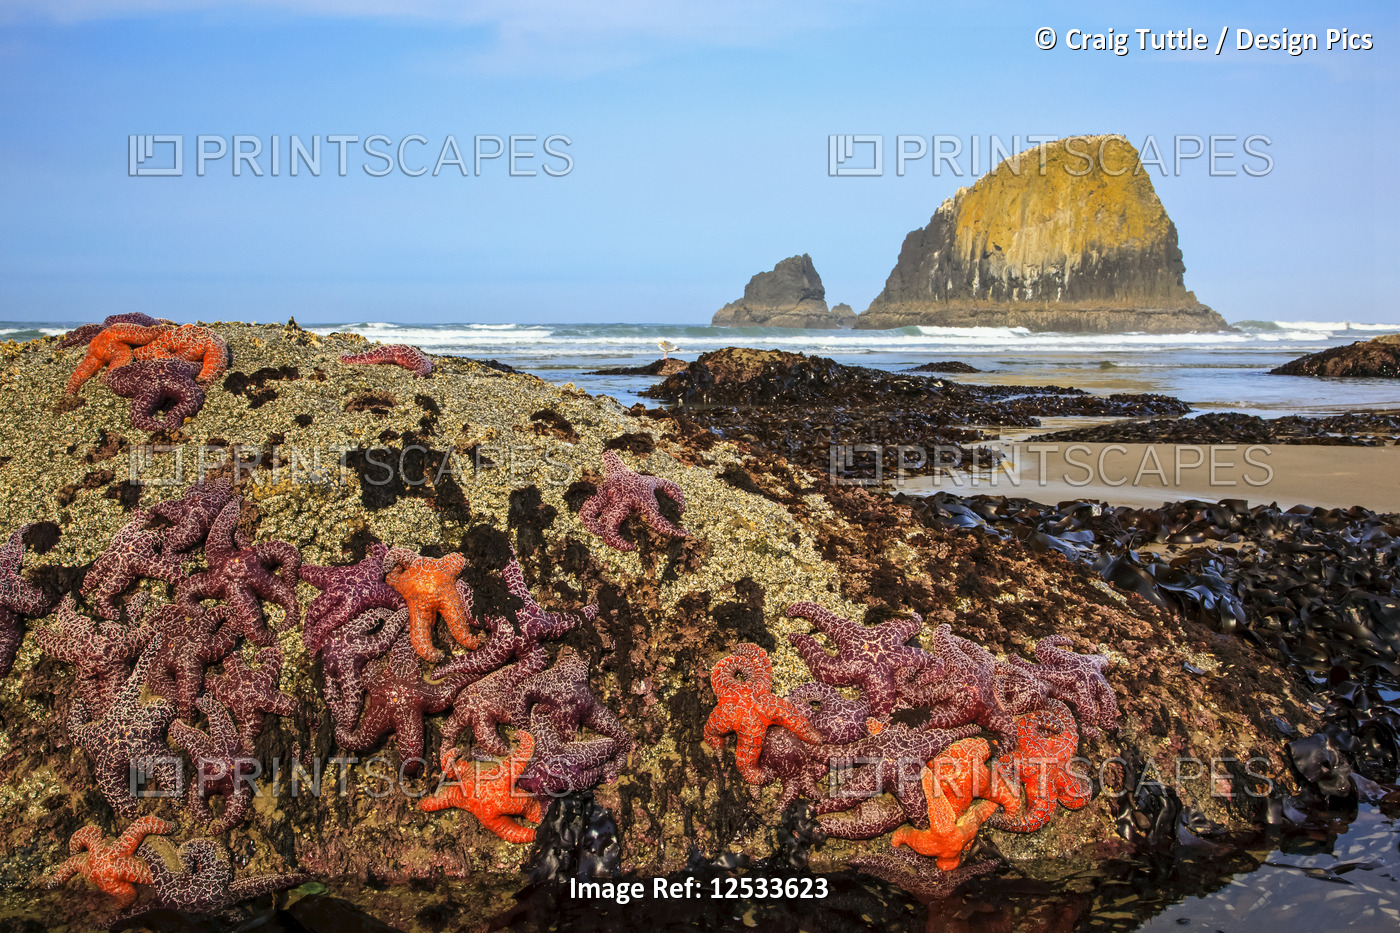 Sea stars clinging to a rock at low tide; Oregon, United States of America